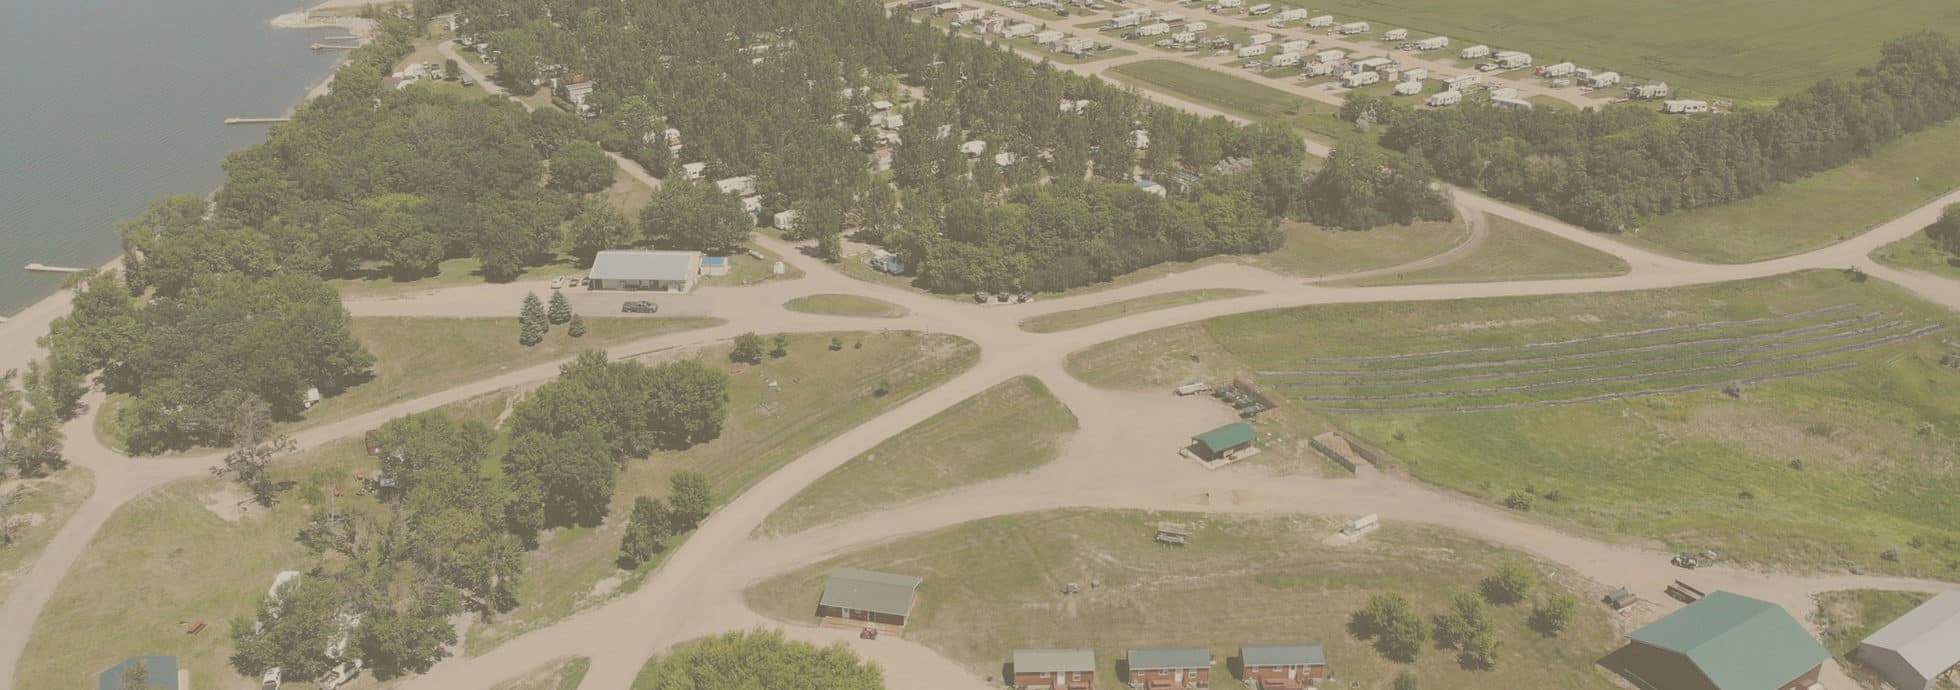 Overhead view of the buildings, campsites, lake and bait shop at Eastbay Campground.